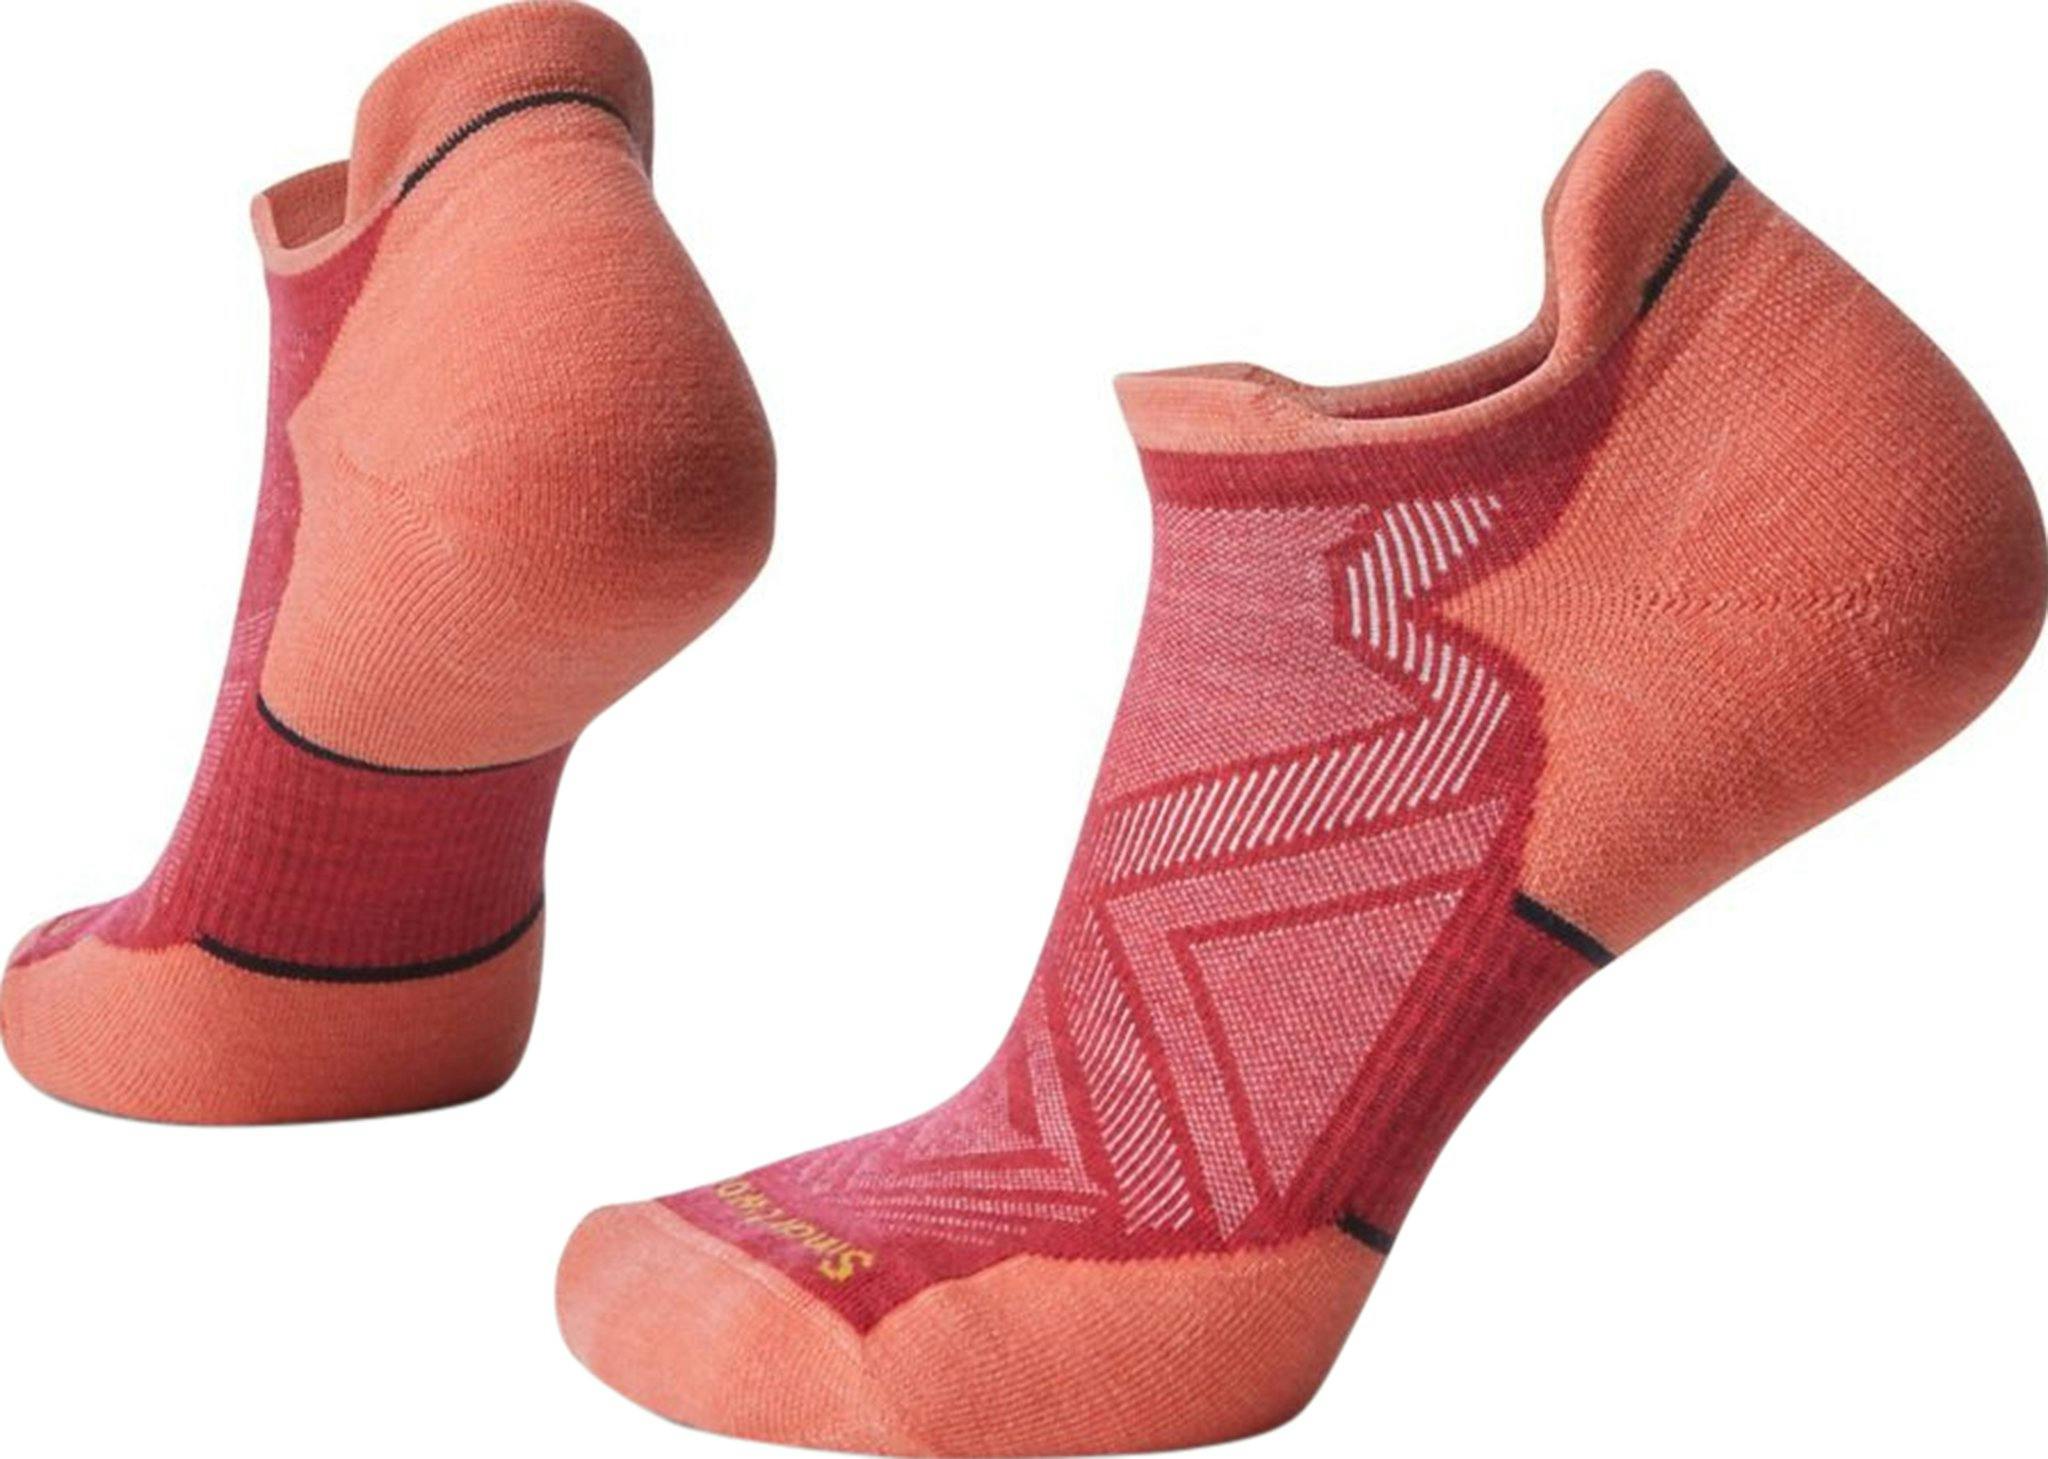 Product image for Run Targeted Cushion Low Ankle Socks - Women's